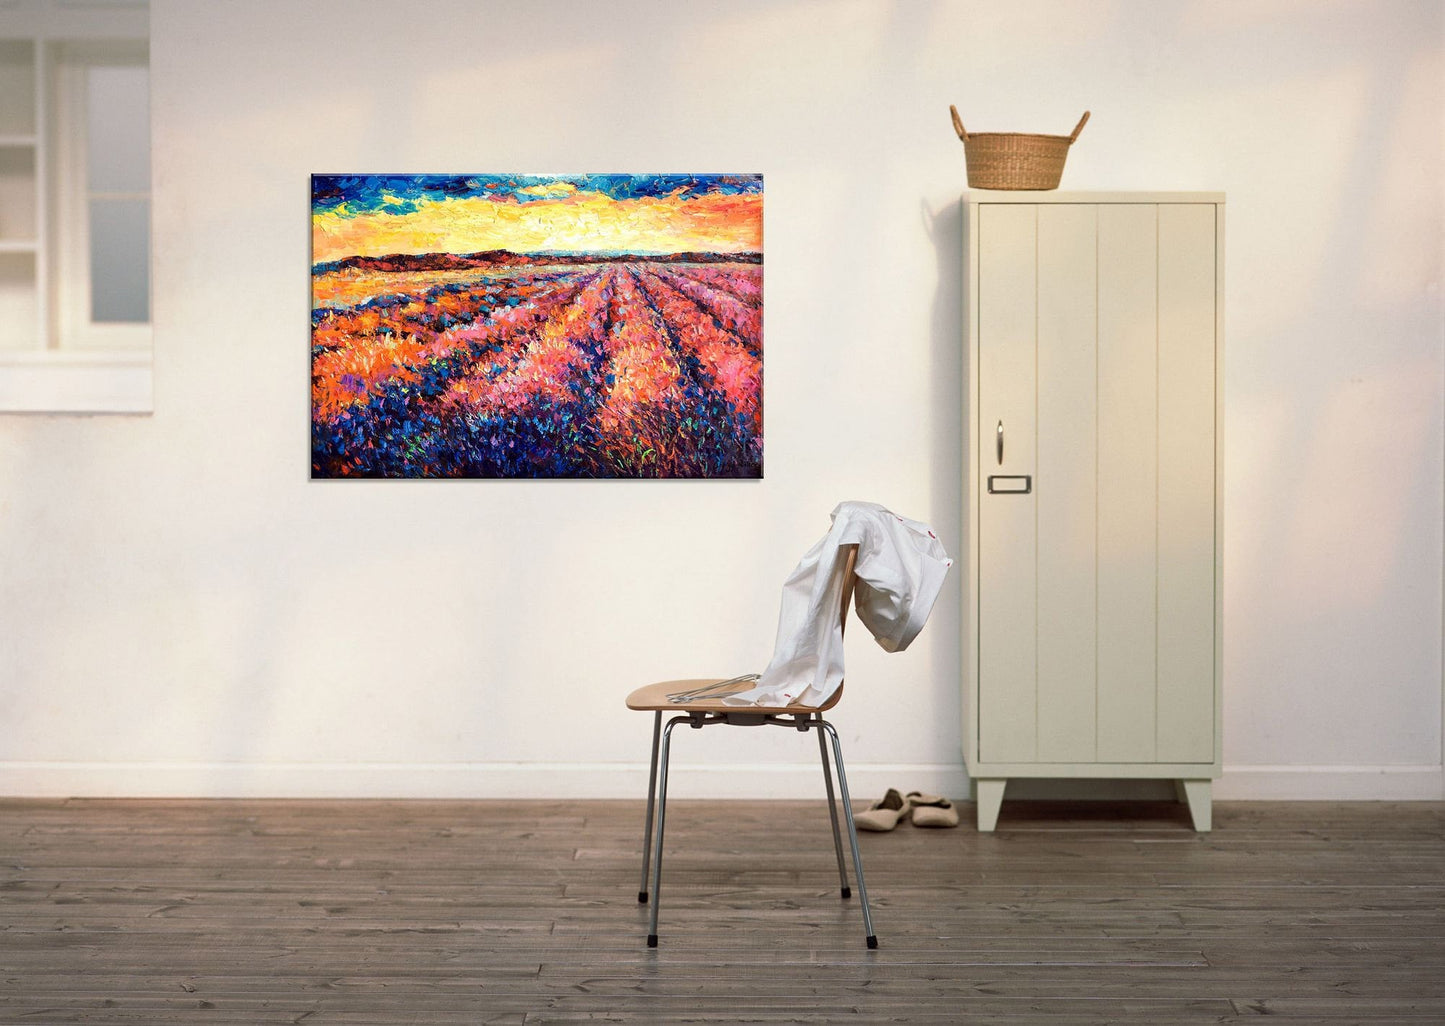 Large Landscape Oil Painting Tuscany Lavender Fields Spring Sunrise, Oil Painting Original, Canvas Art, Abstract Painting, Abstract Wall Art